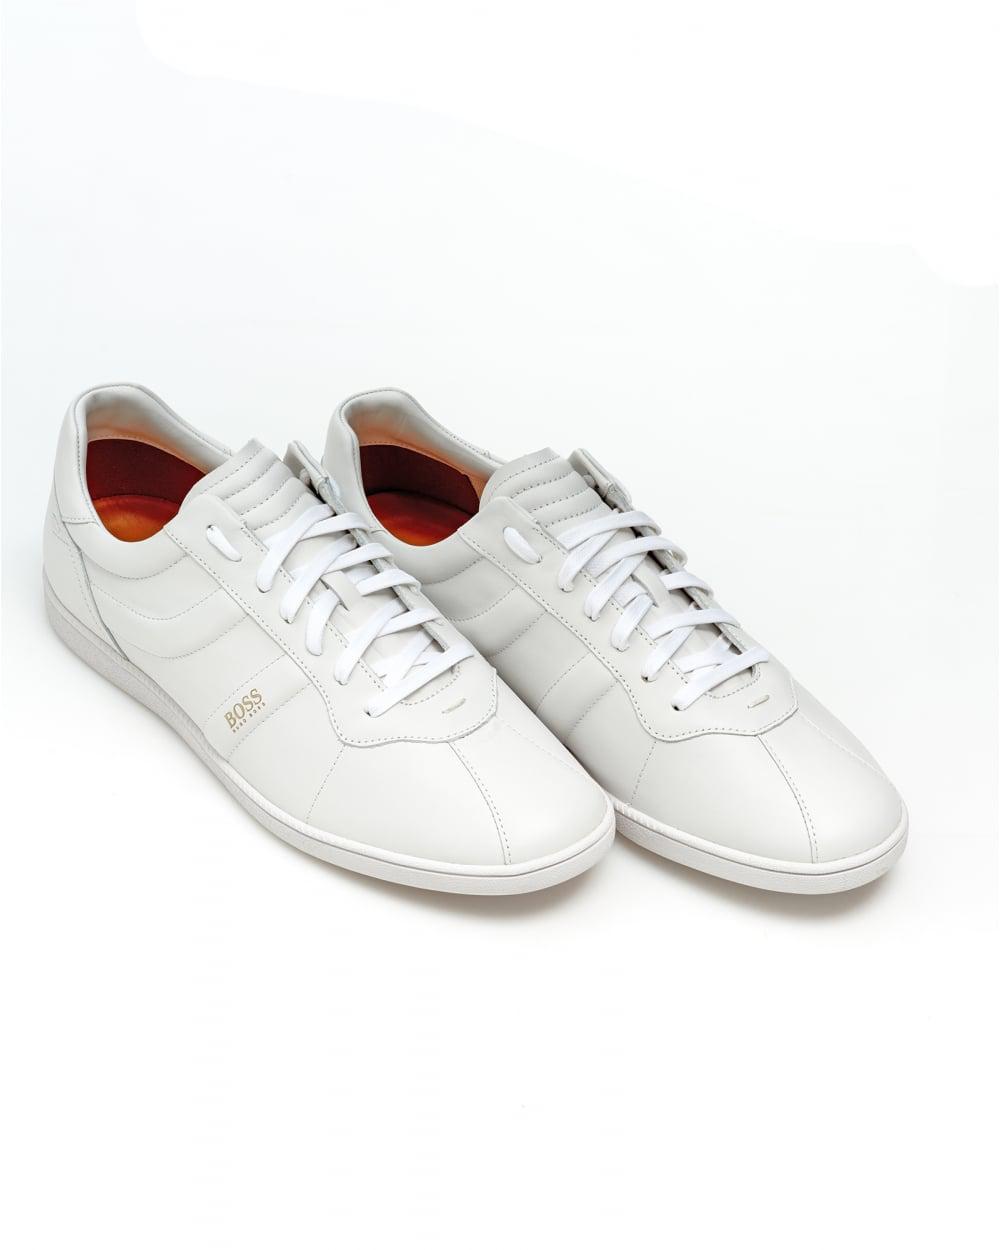 BOSS Rumba Ten Trainers, White Leather Sneakers in White for Men - Lyst